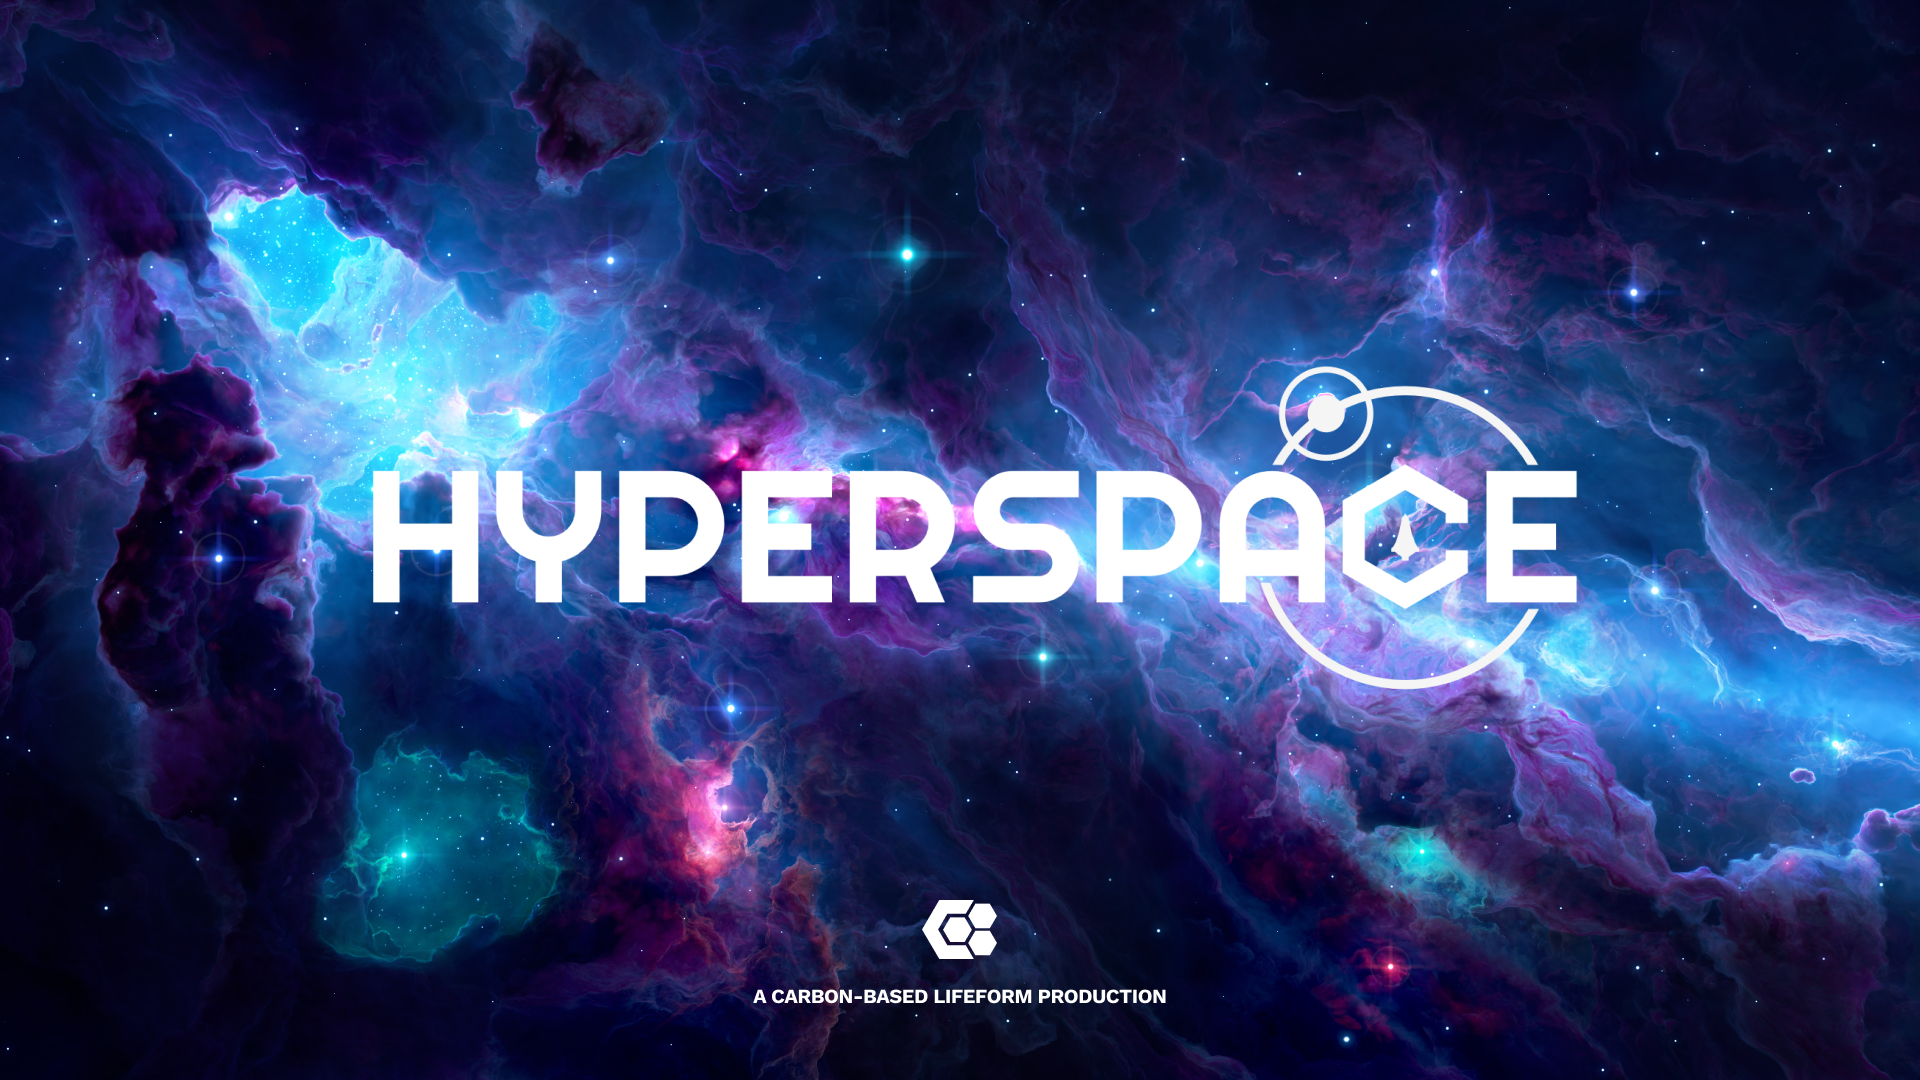 Hyperspace Announced As First Project From Carbon Based Lifeforms